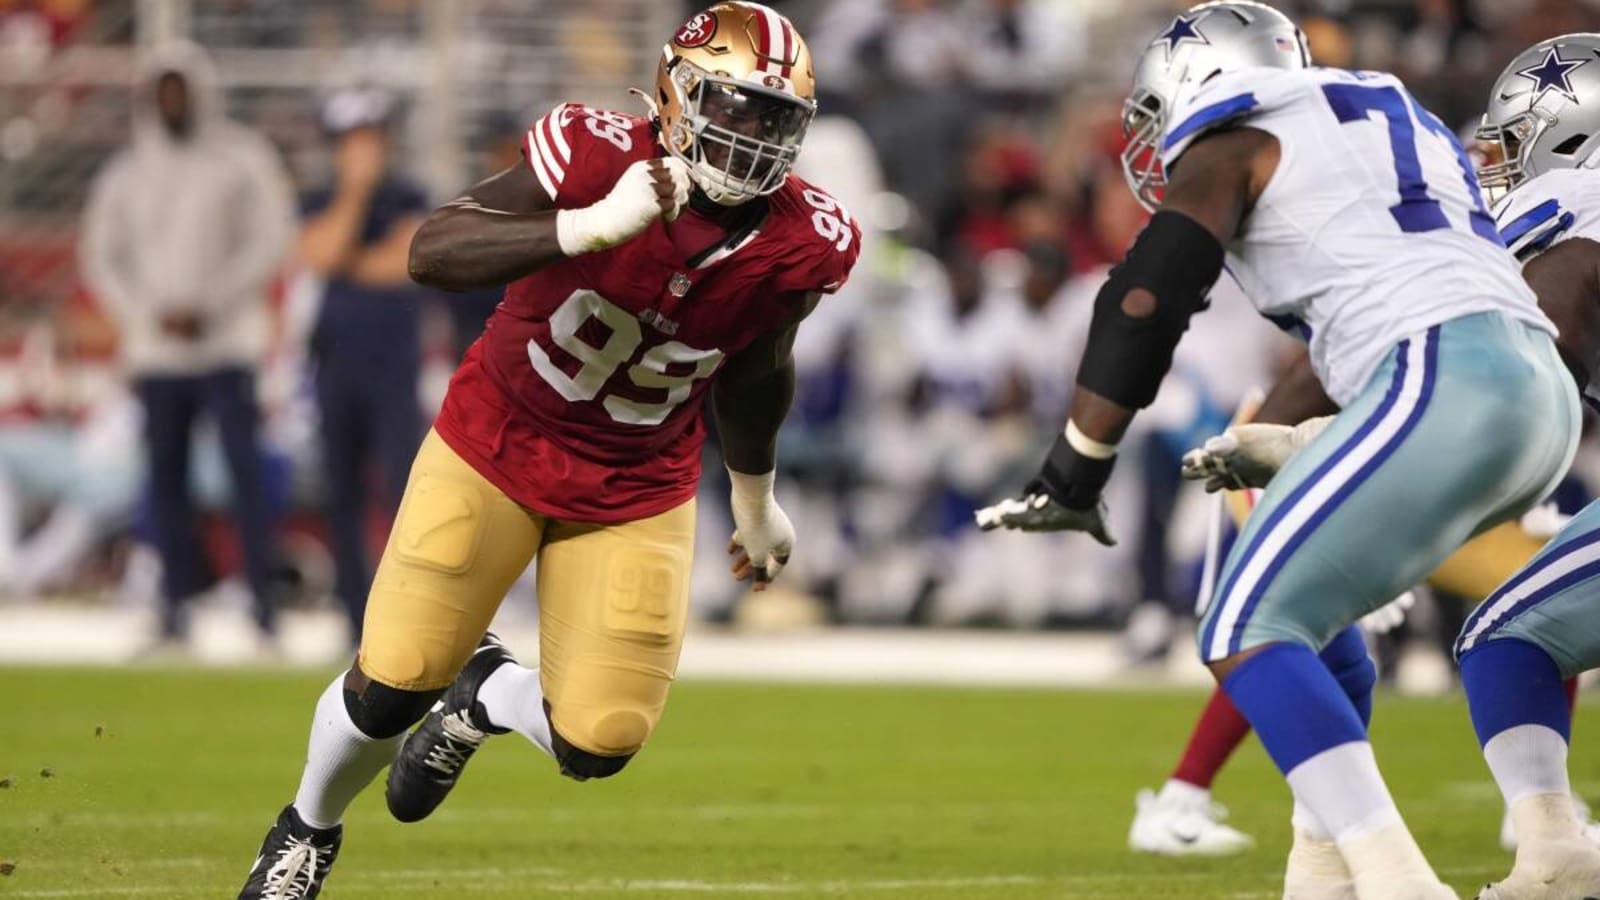 Javon Kinlaw has a Prime Opportunity to Shine for the 49ers